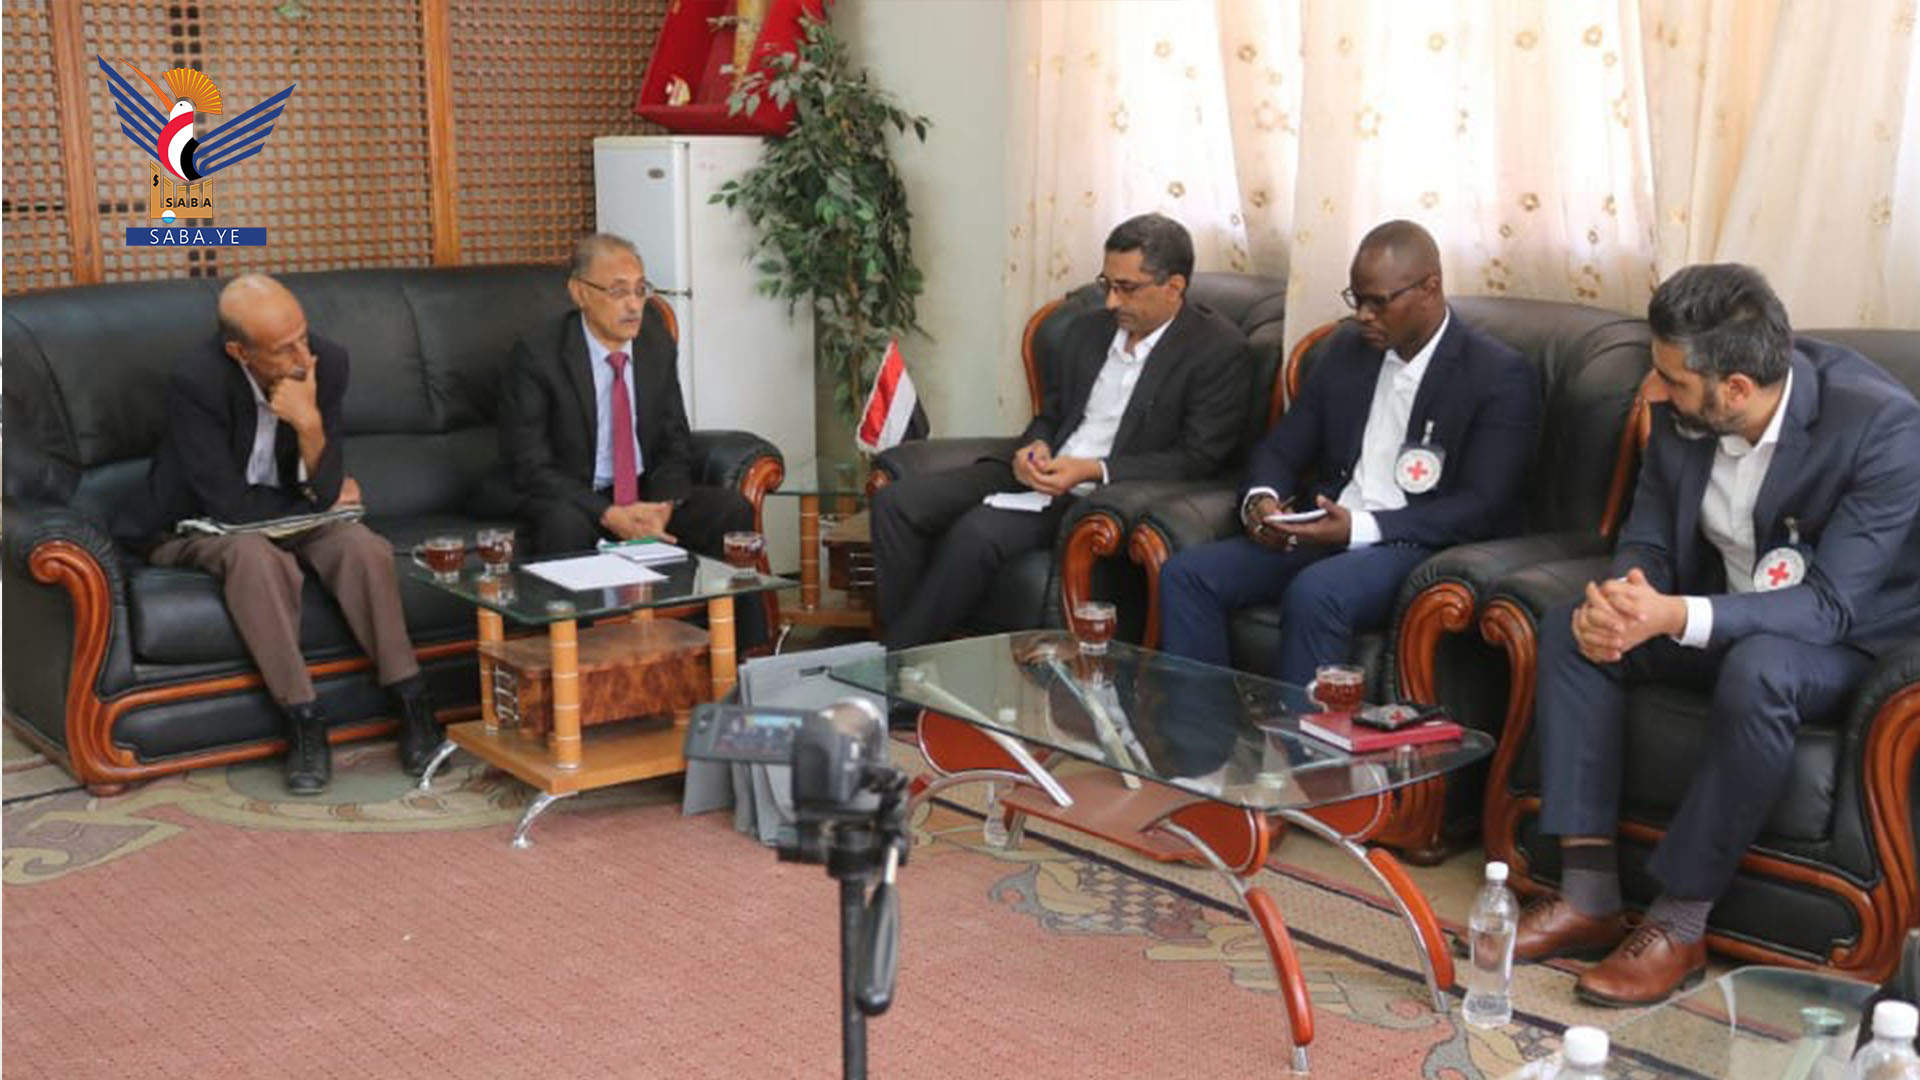 ICRC's interventions in support of fish sector in Hodeida discussed